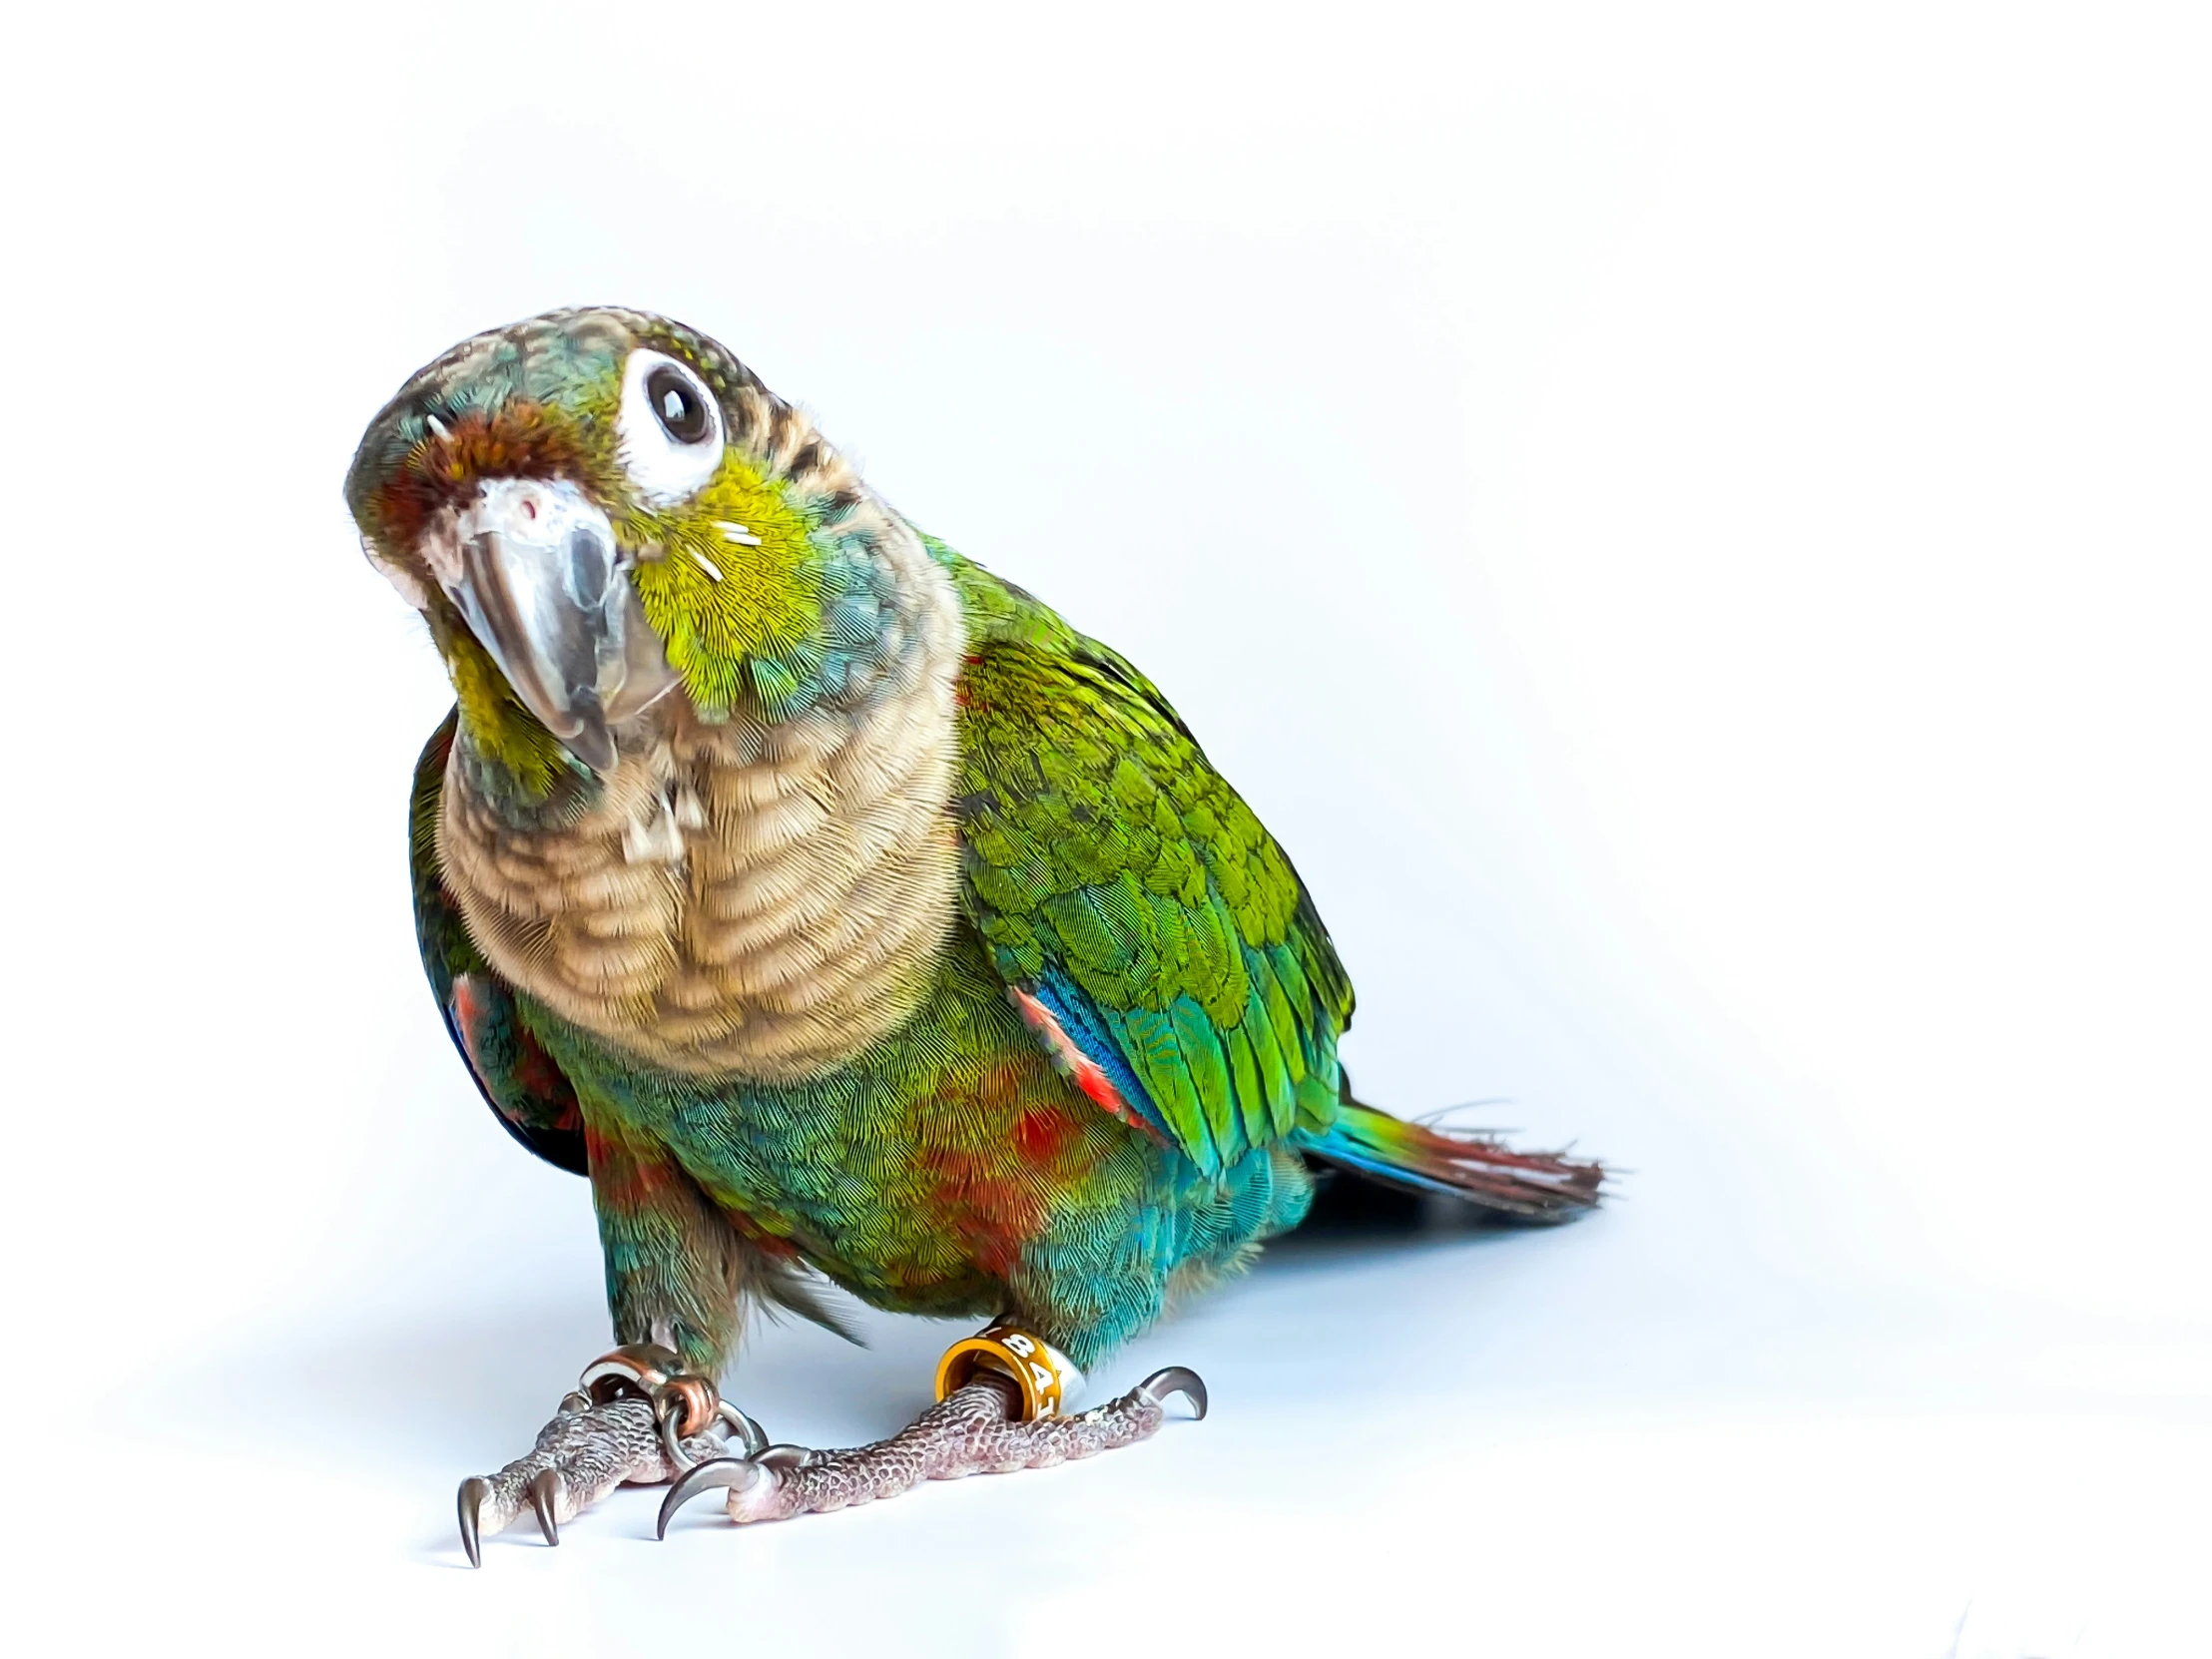 a multicolored parrot standing on its hind legs and looking upward